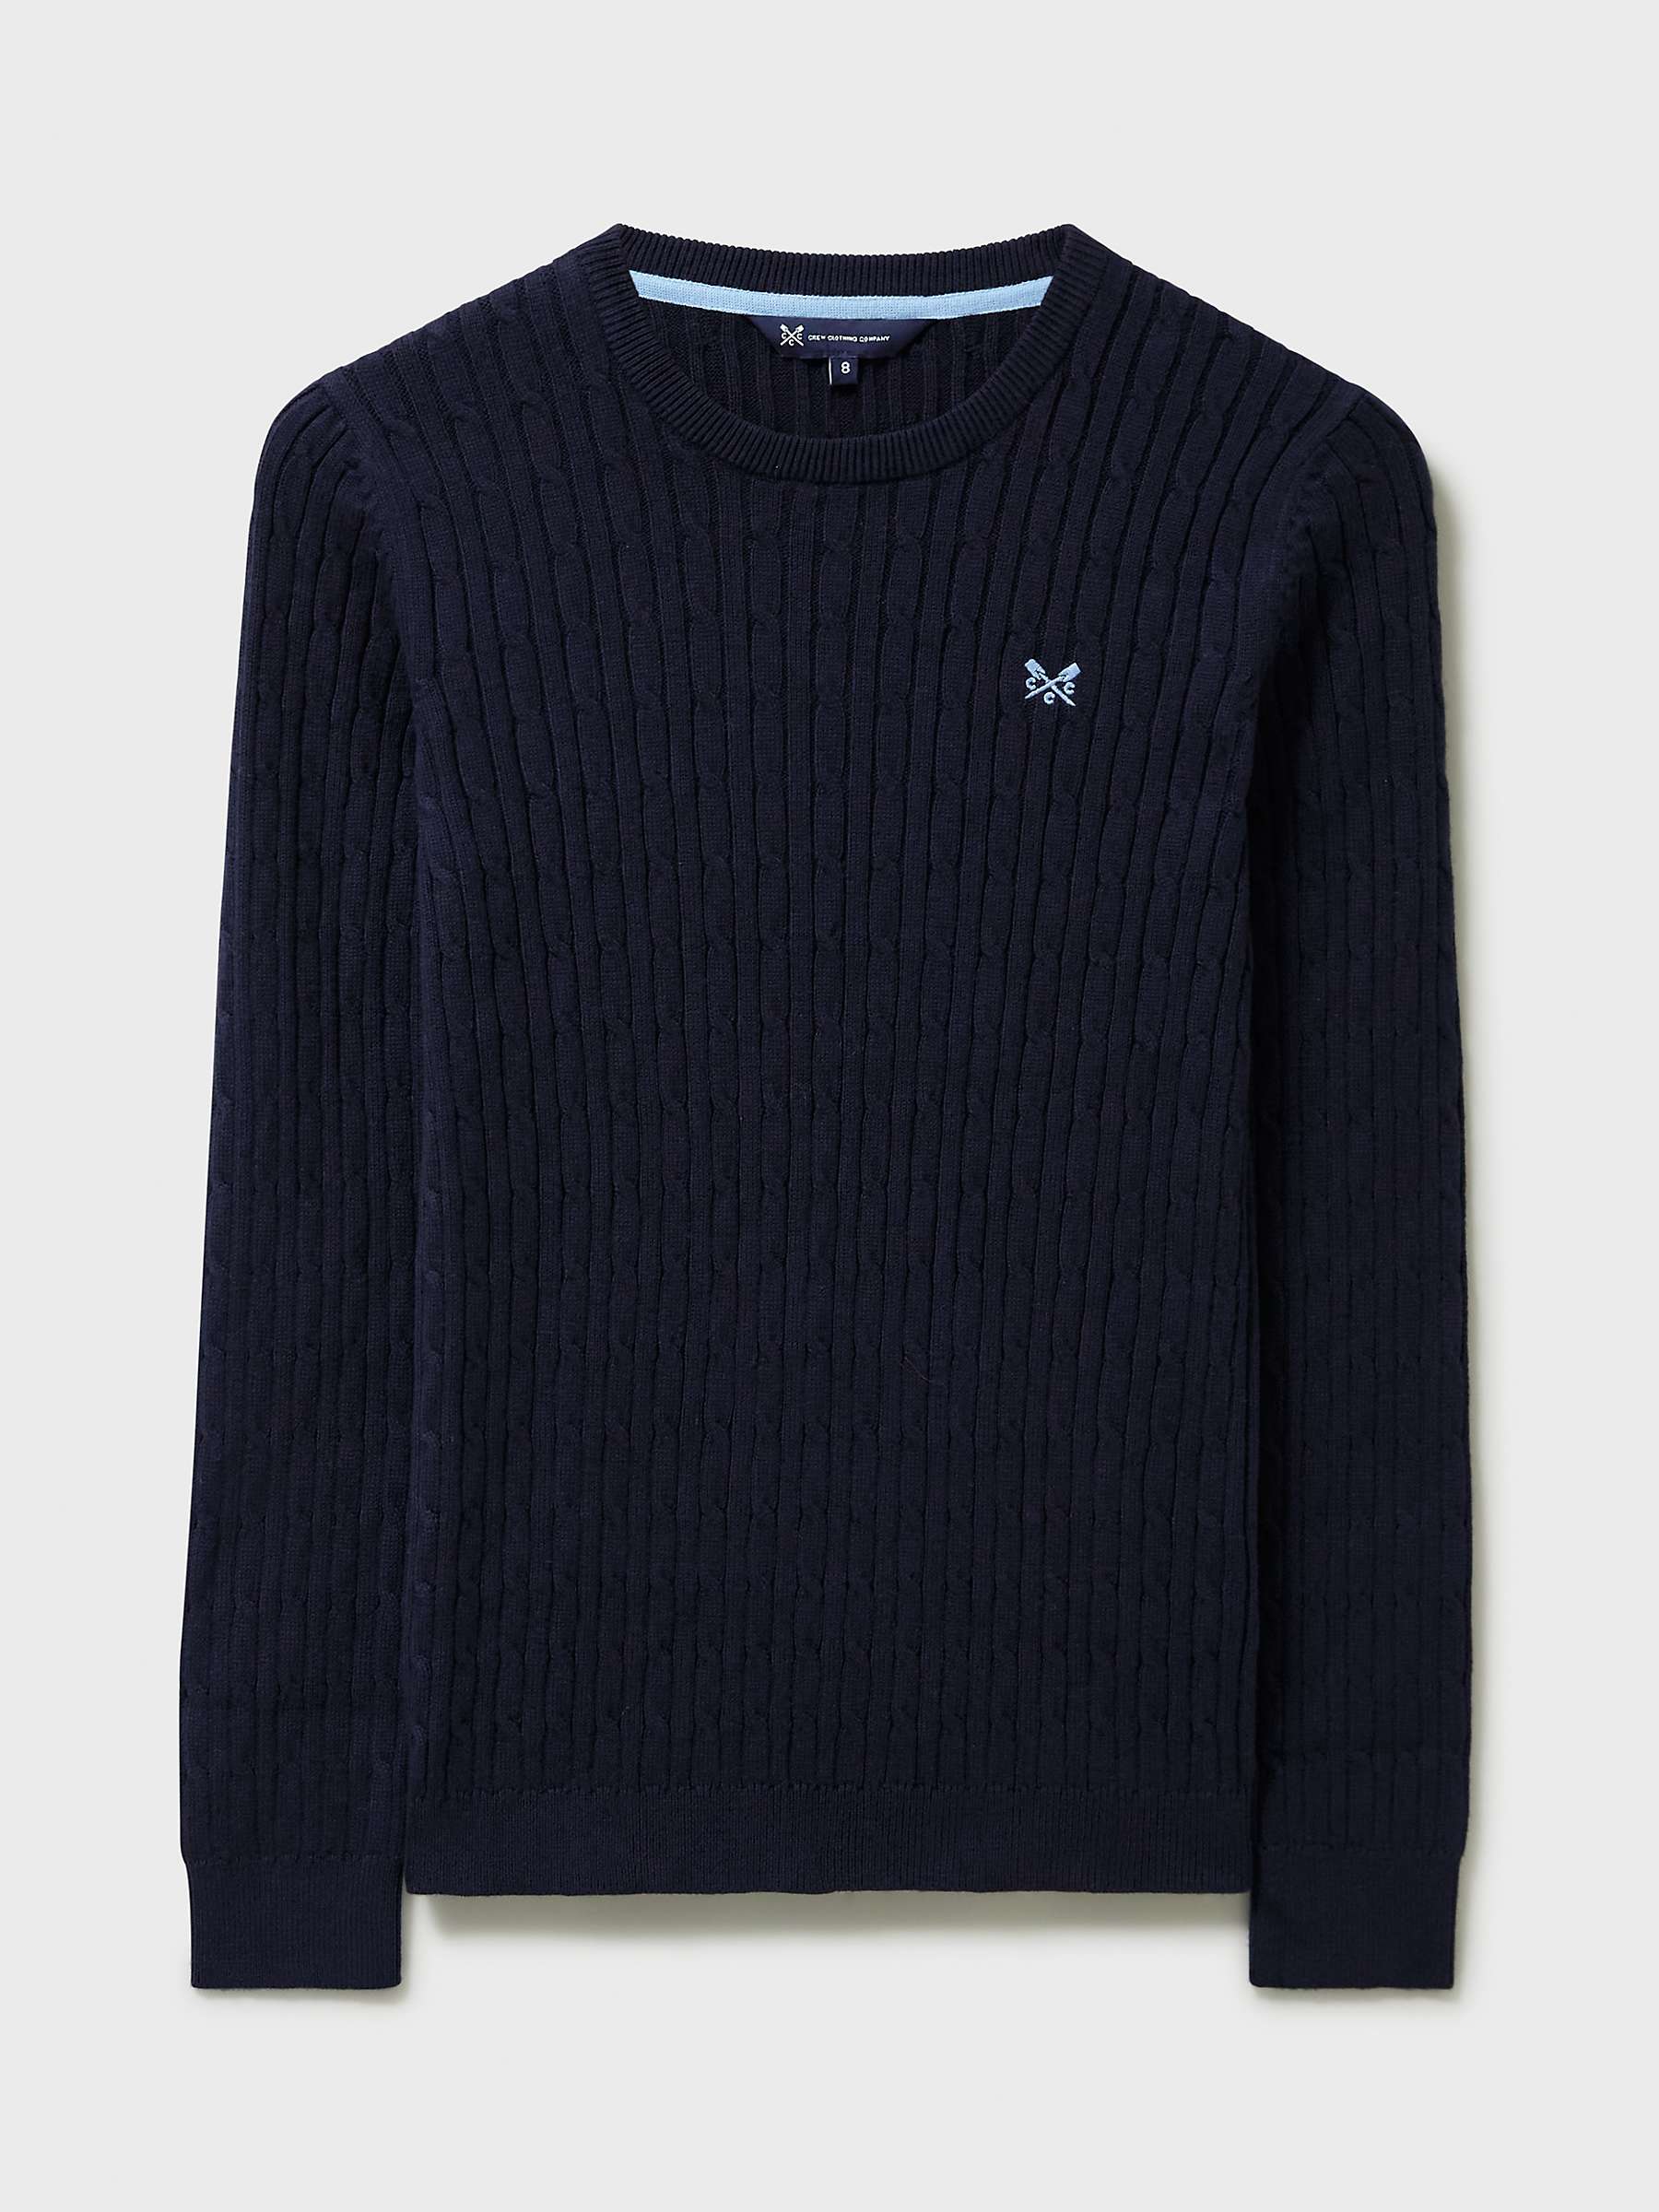 Buy Crew Clothing Heritage Crew Neck Cable Knit Jumper Online at johnlewis.com